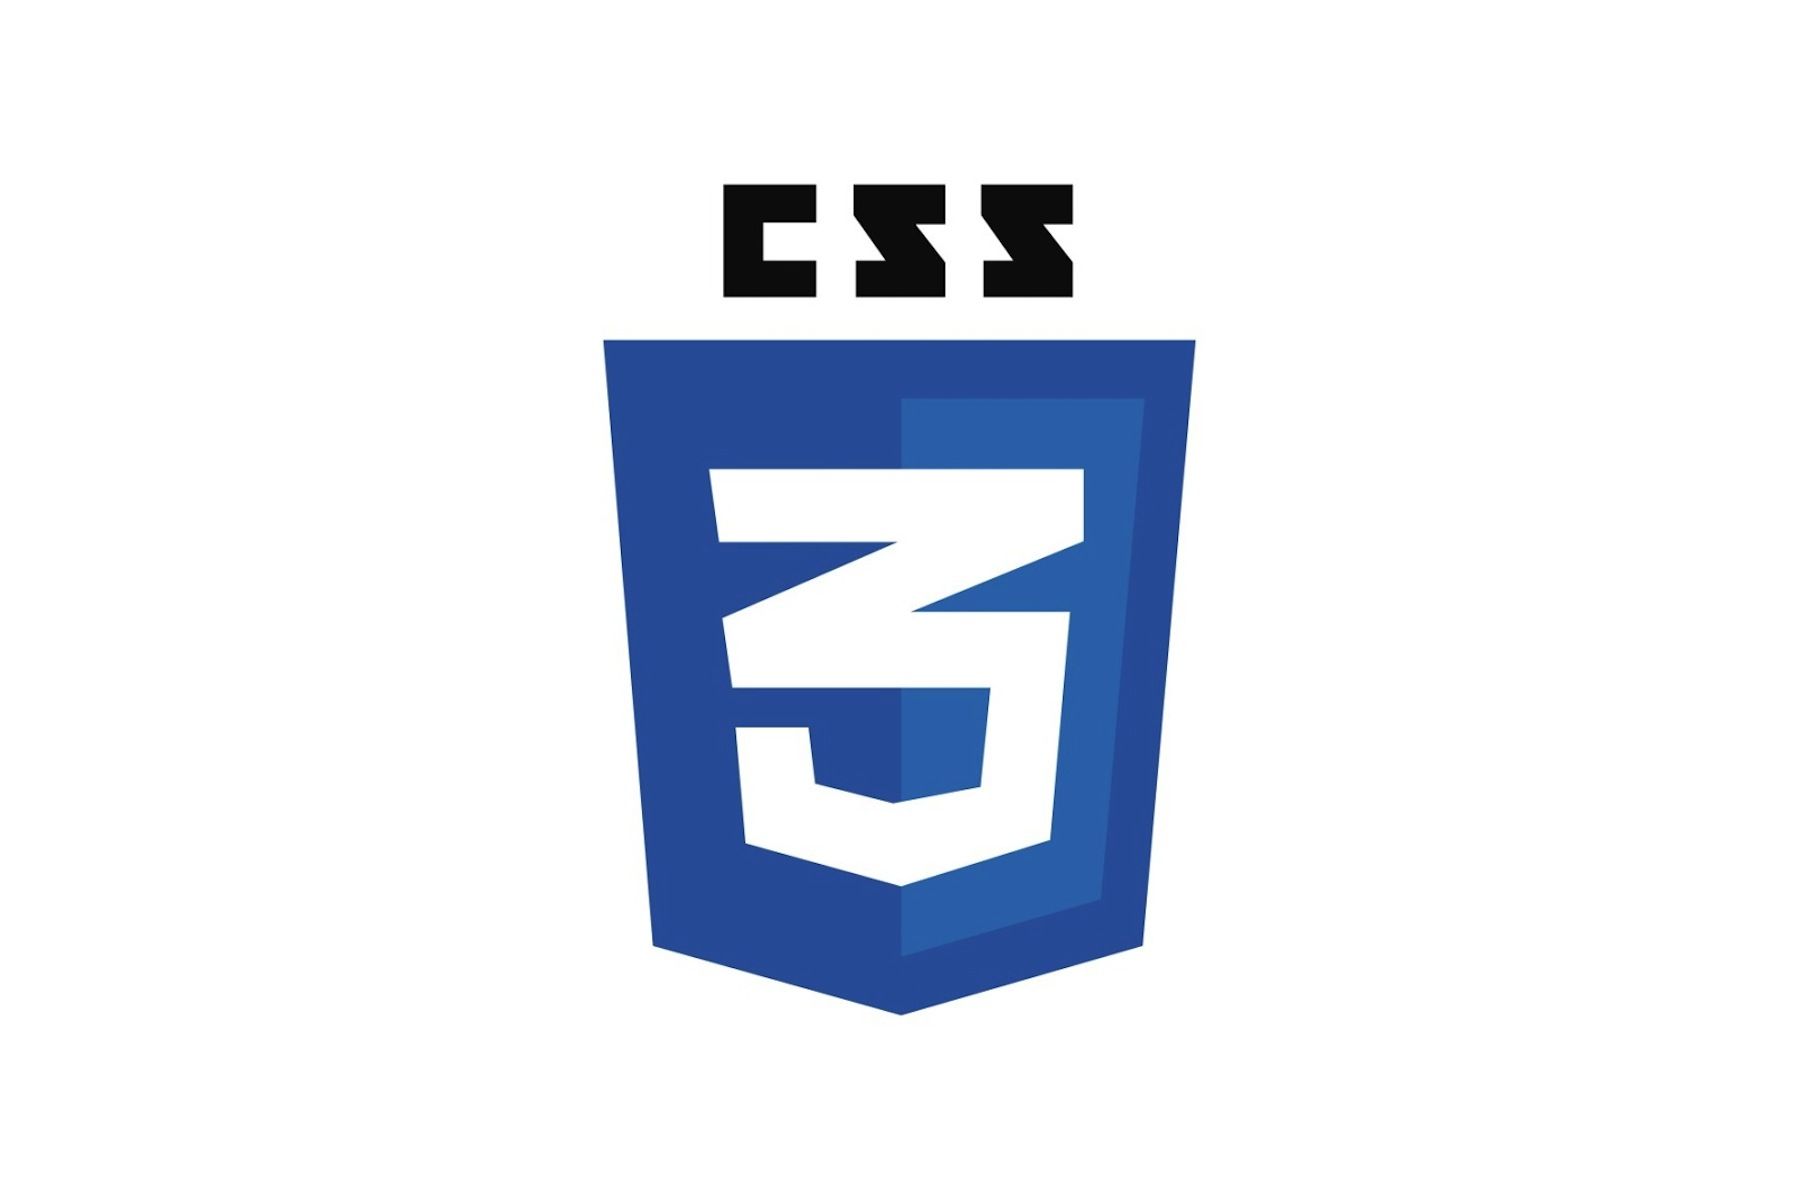 What is css